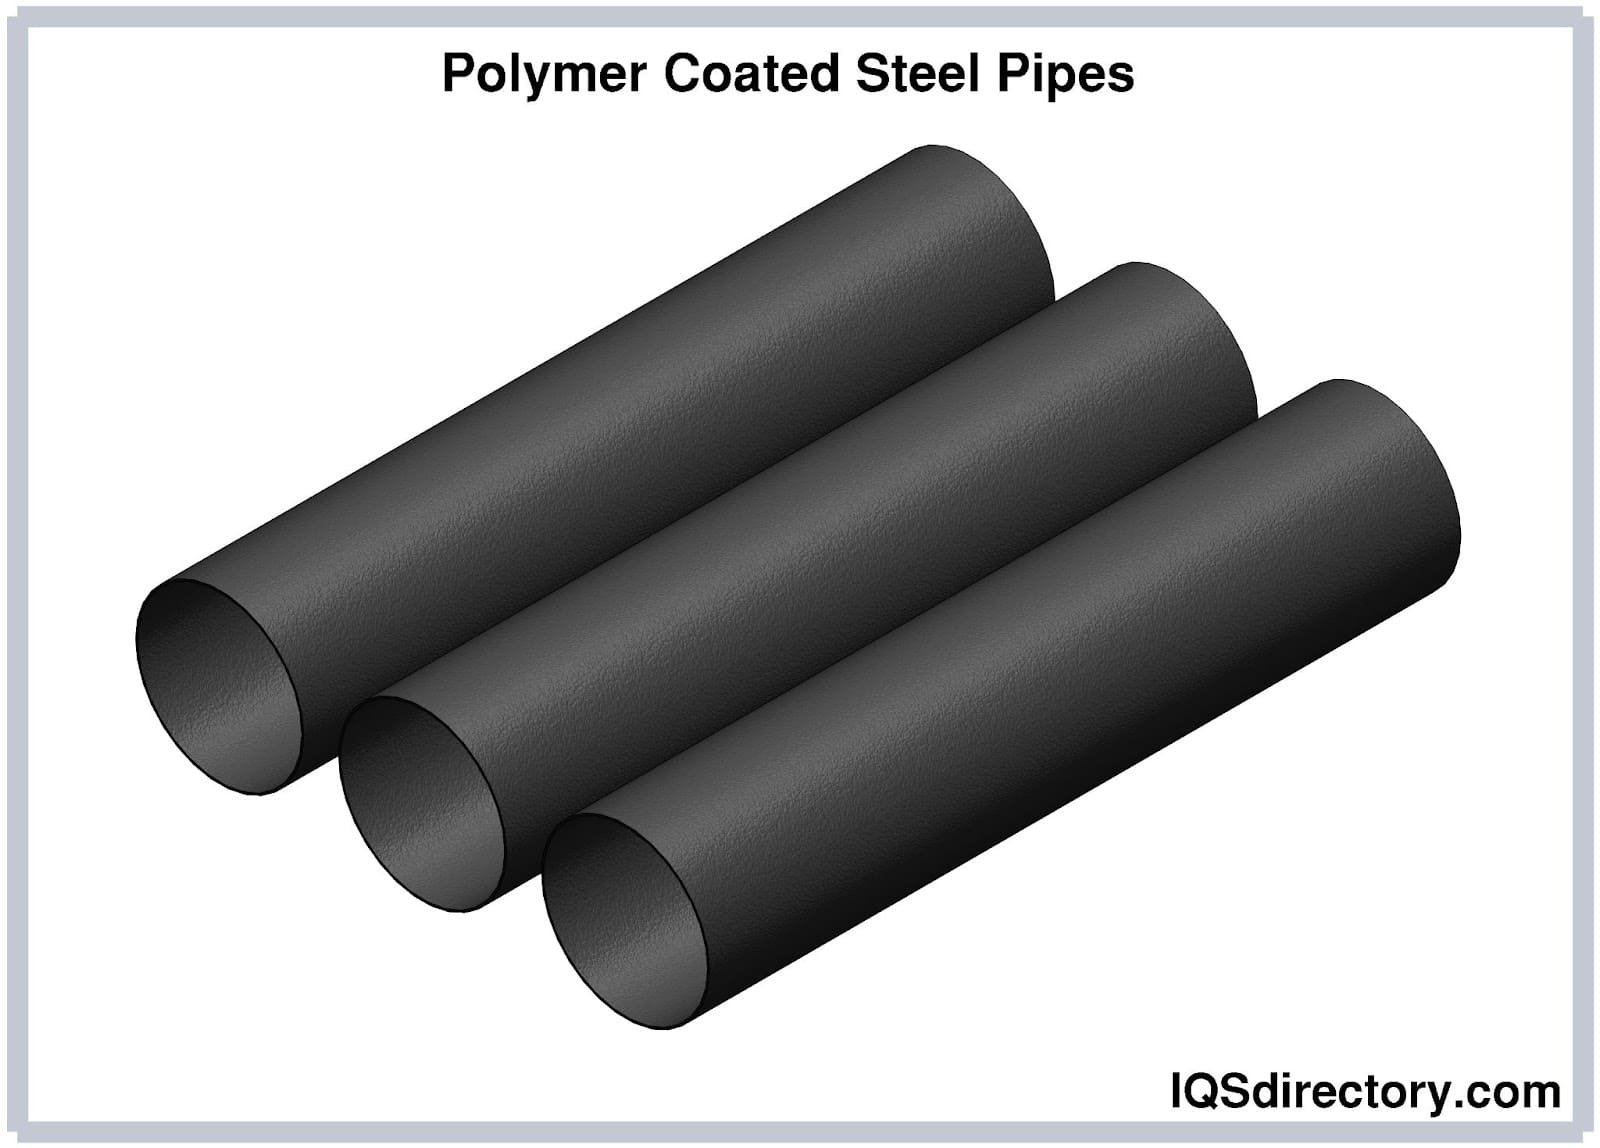 Polymer Coated Steel Pipes